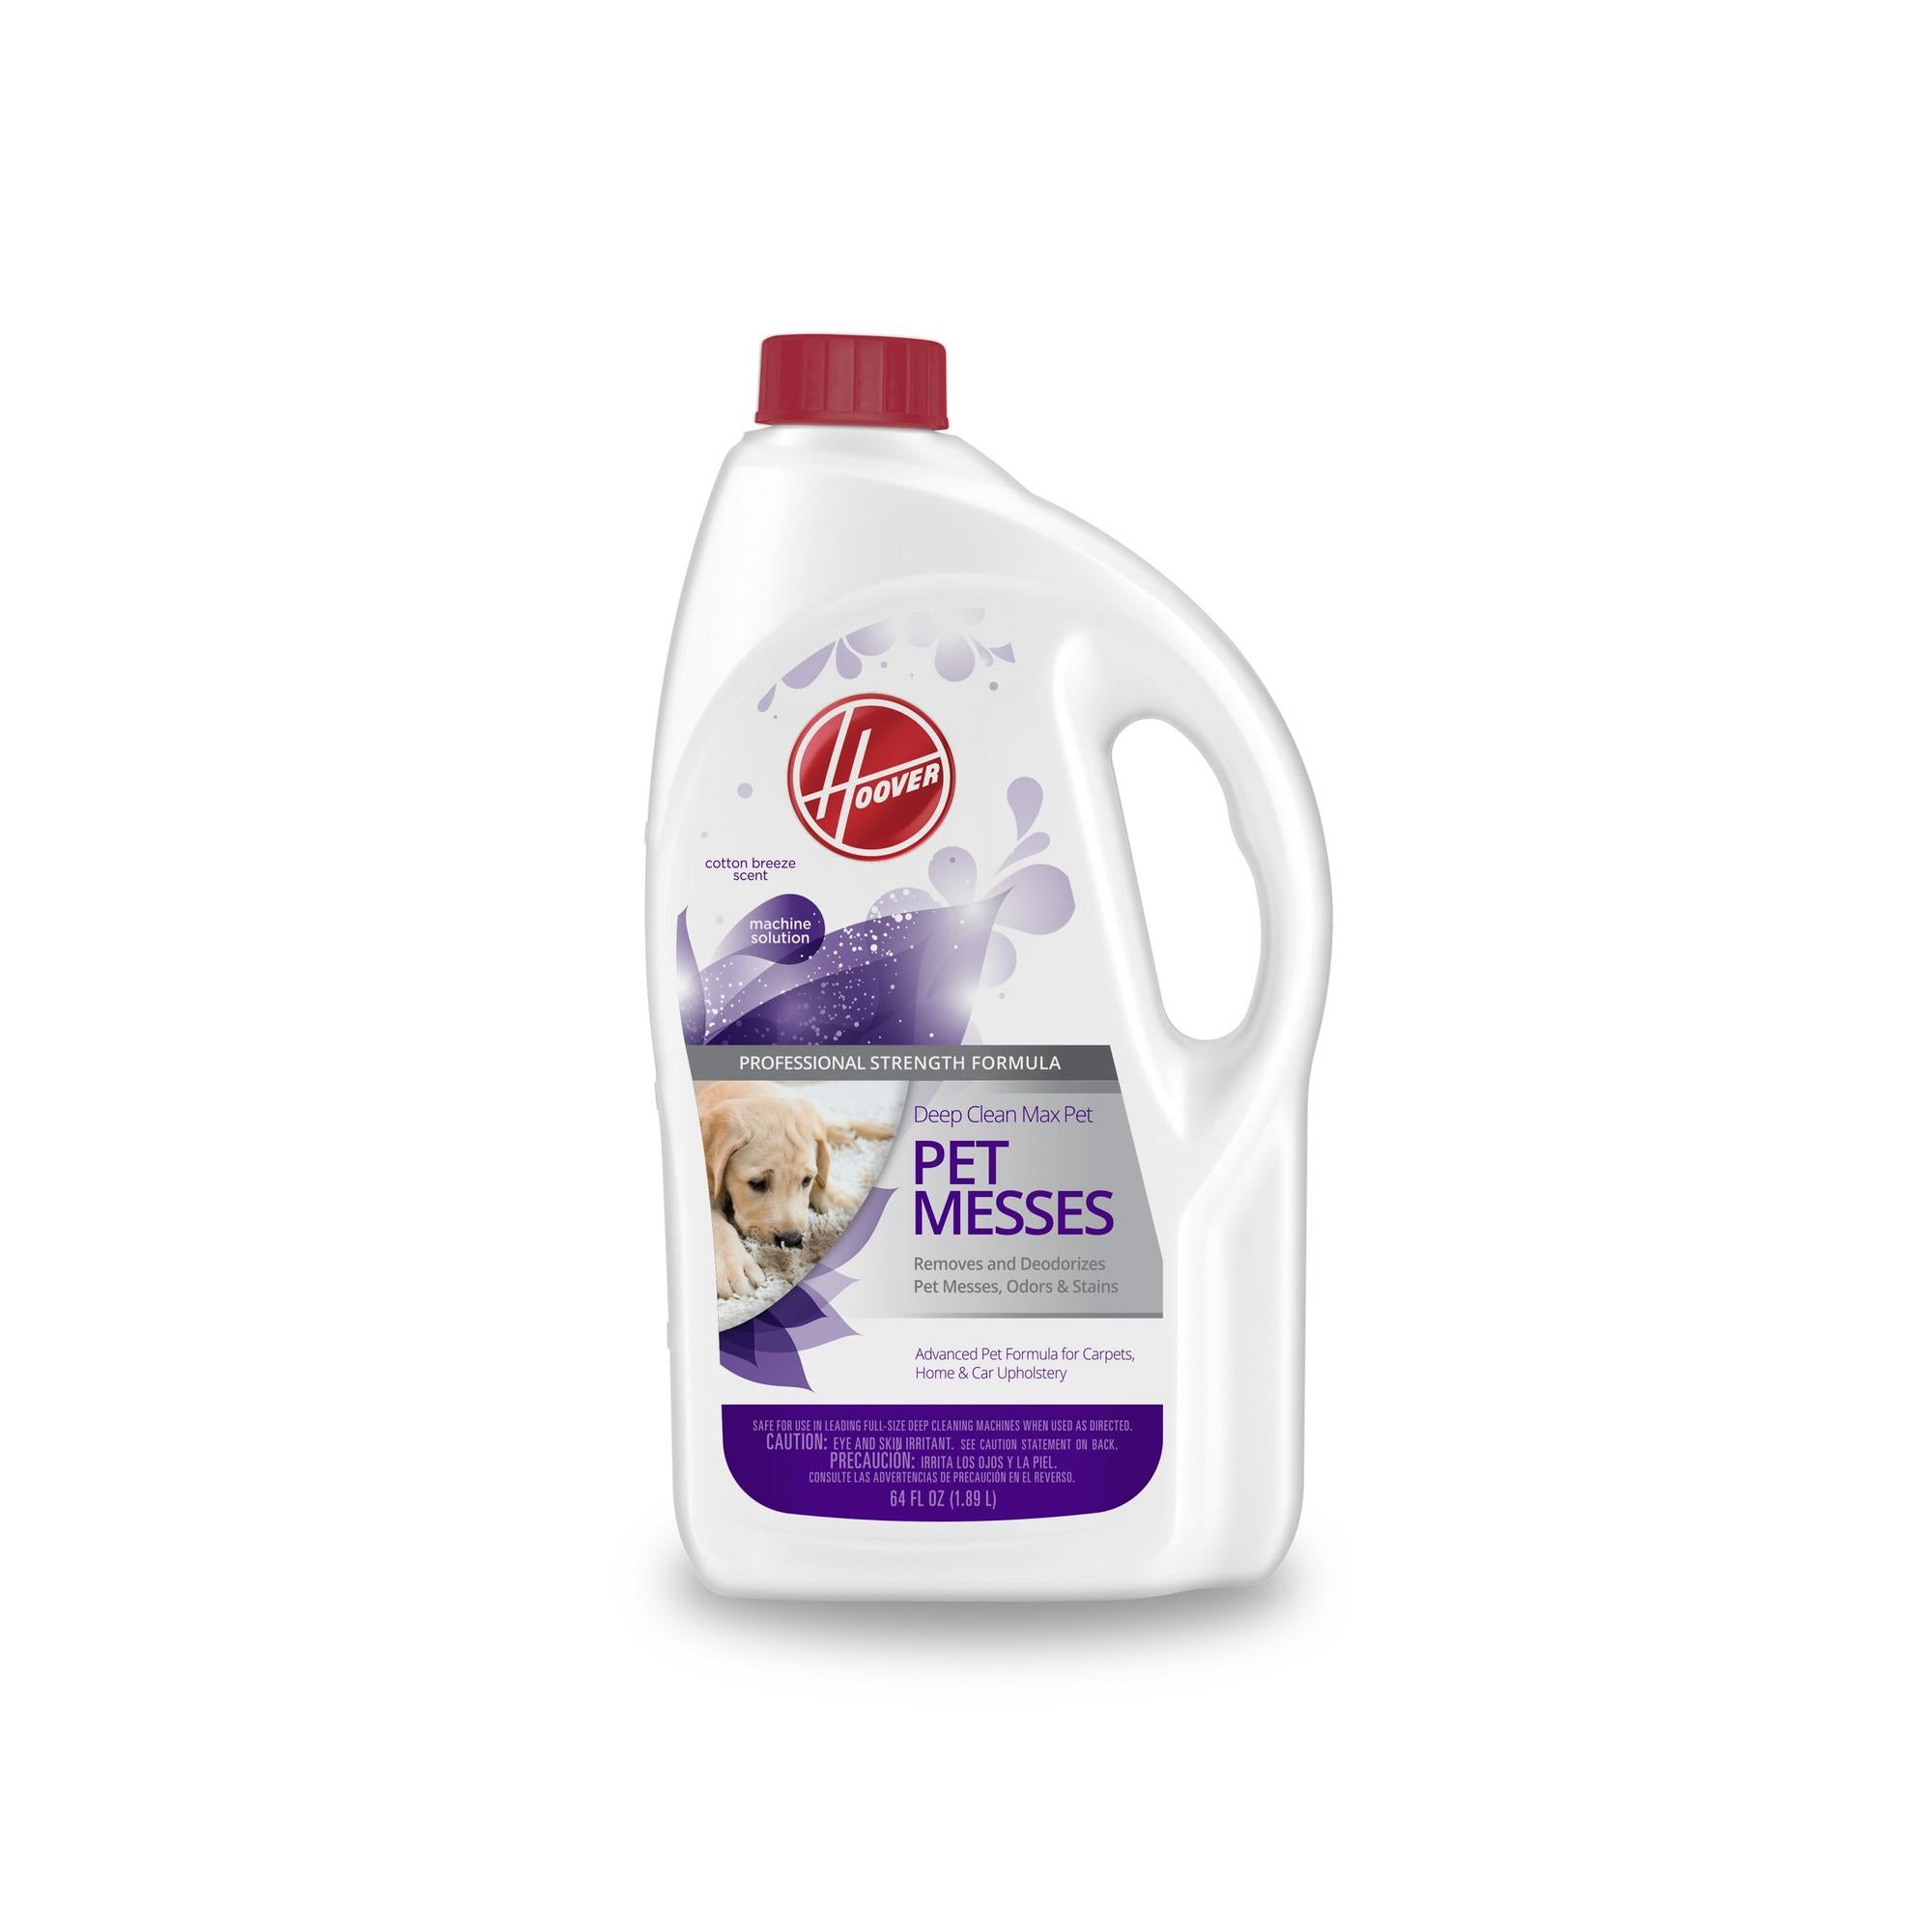 Pet cleaner. Pet messes Hoover. Carpet Cleaner solution. Professional Carpet Cleaning for Pets. Clean Pet.